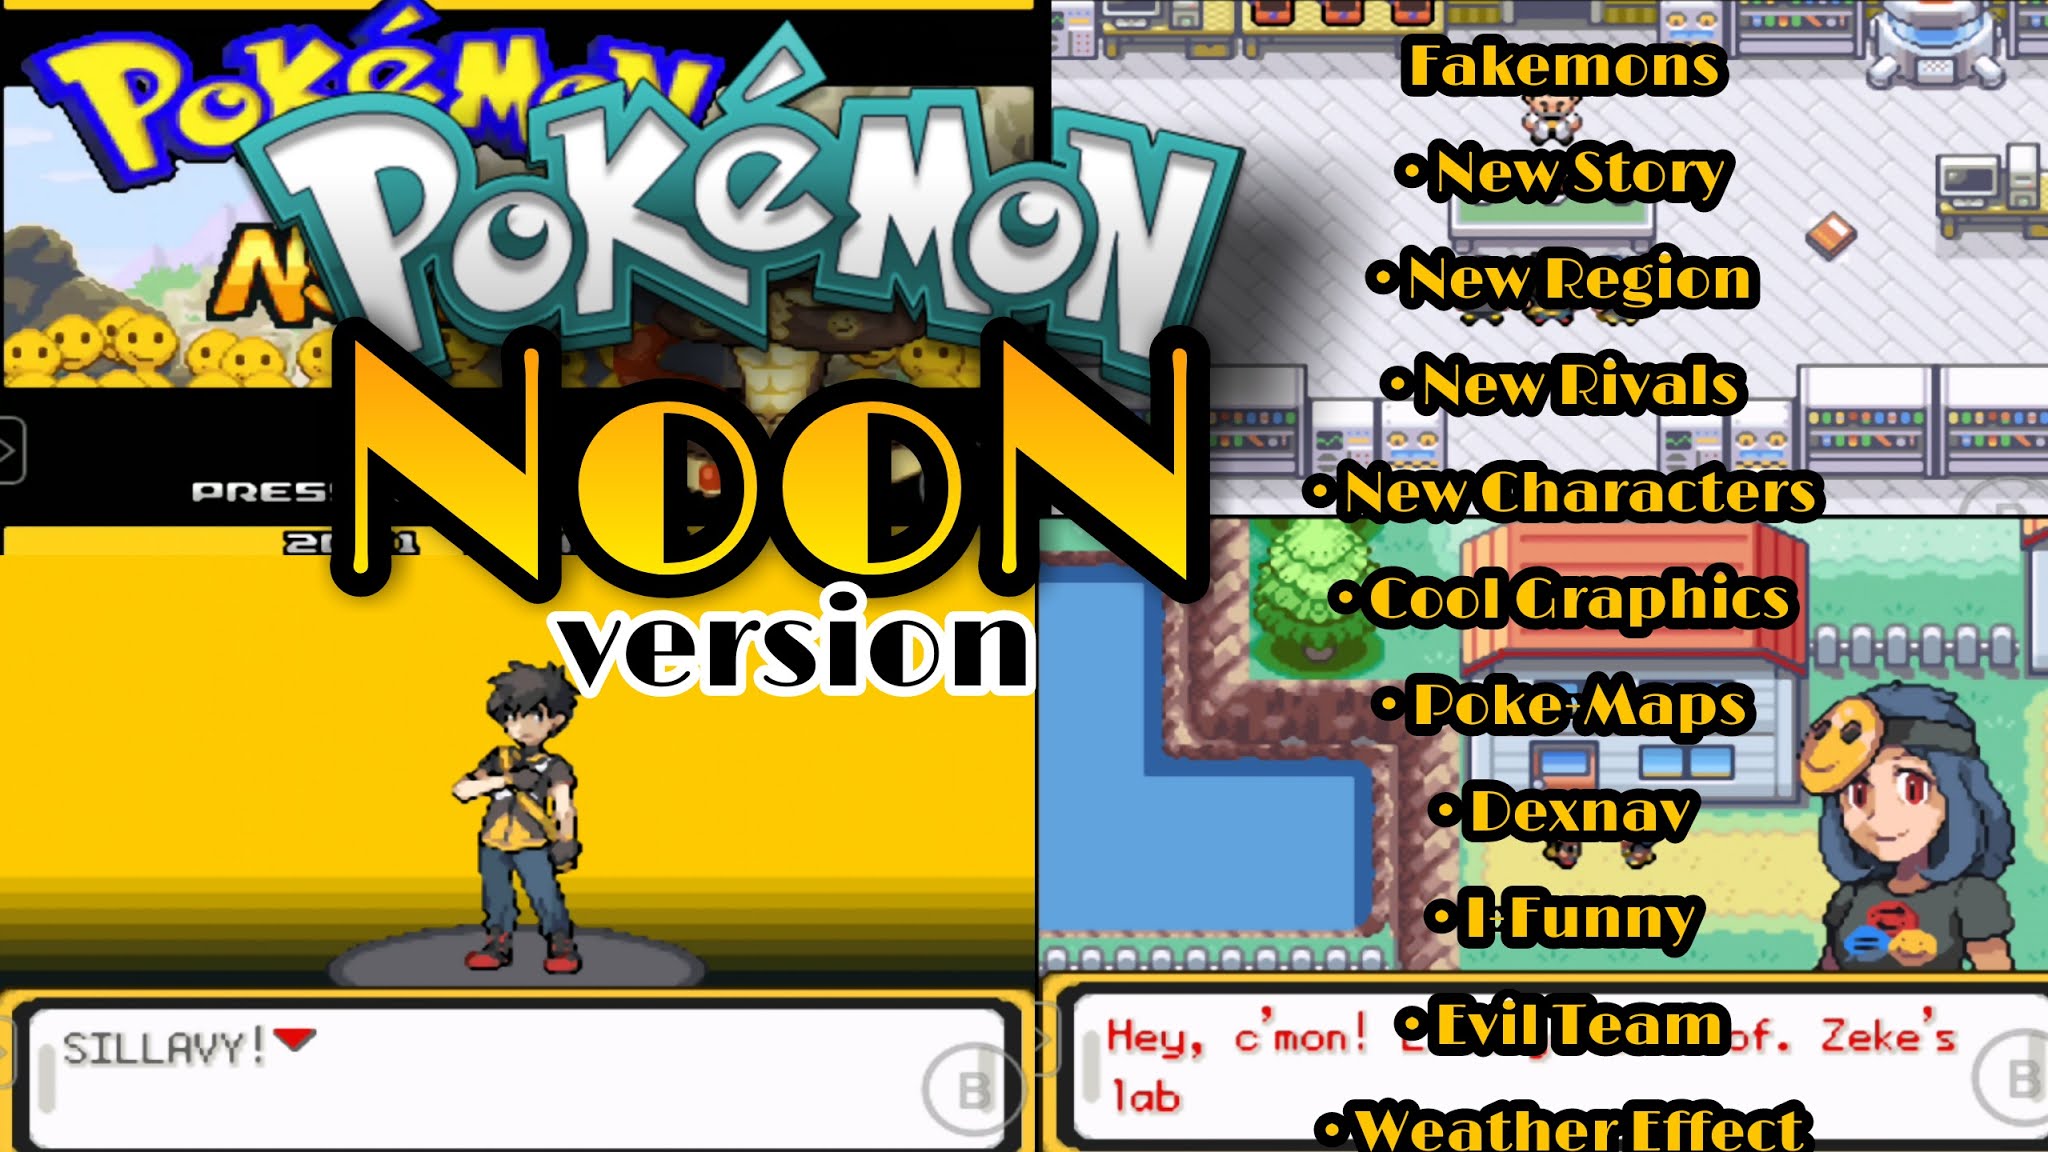 Pokemon Noon Version GBA With New Region, Exp Share All, Fakemons & New